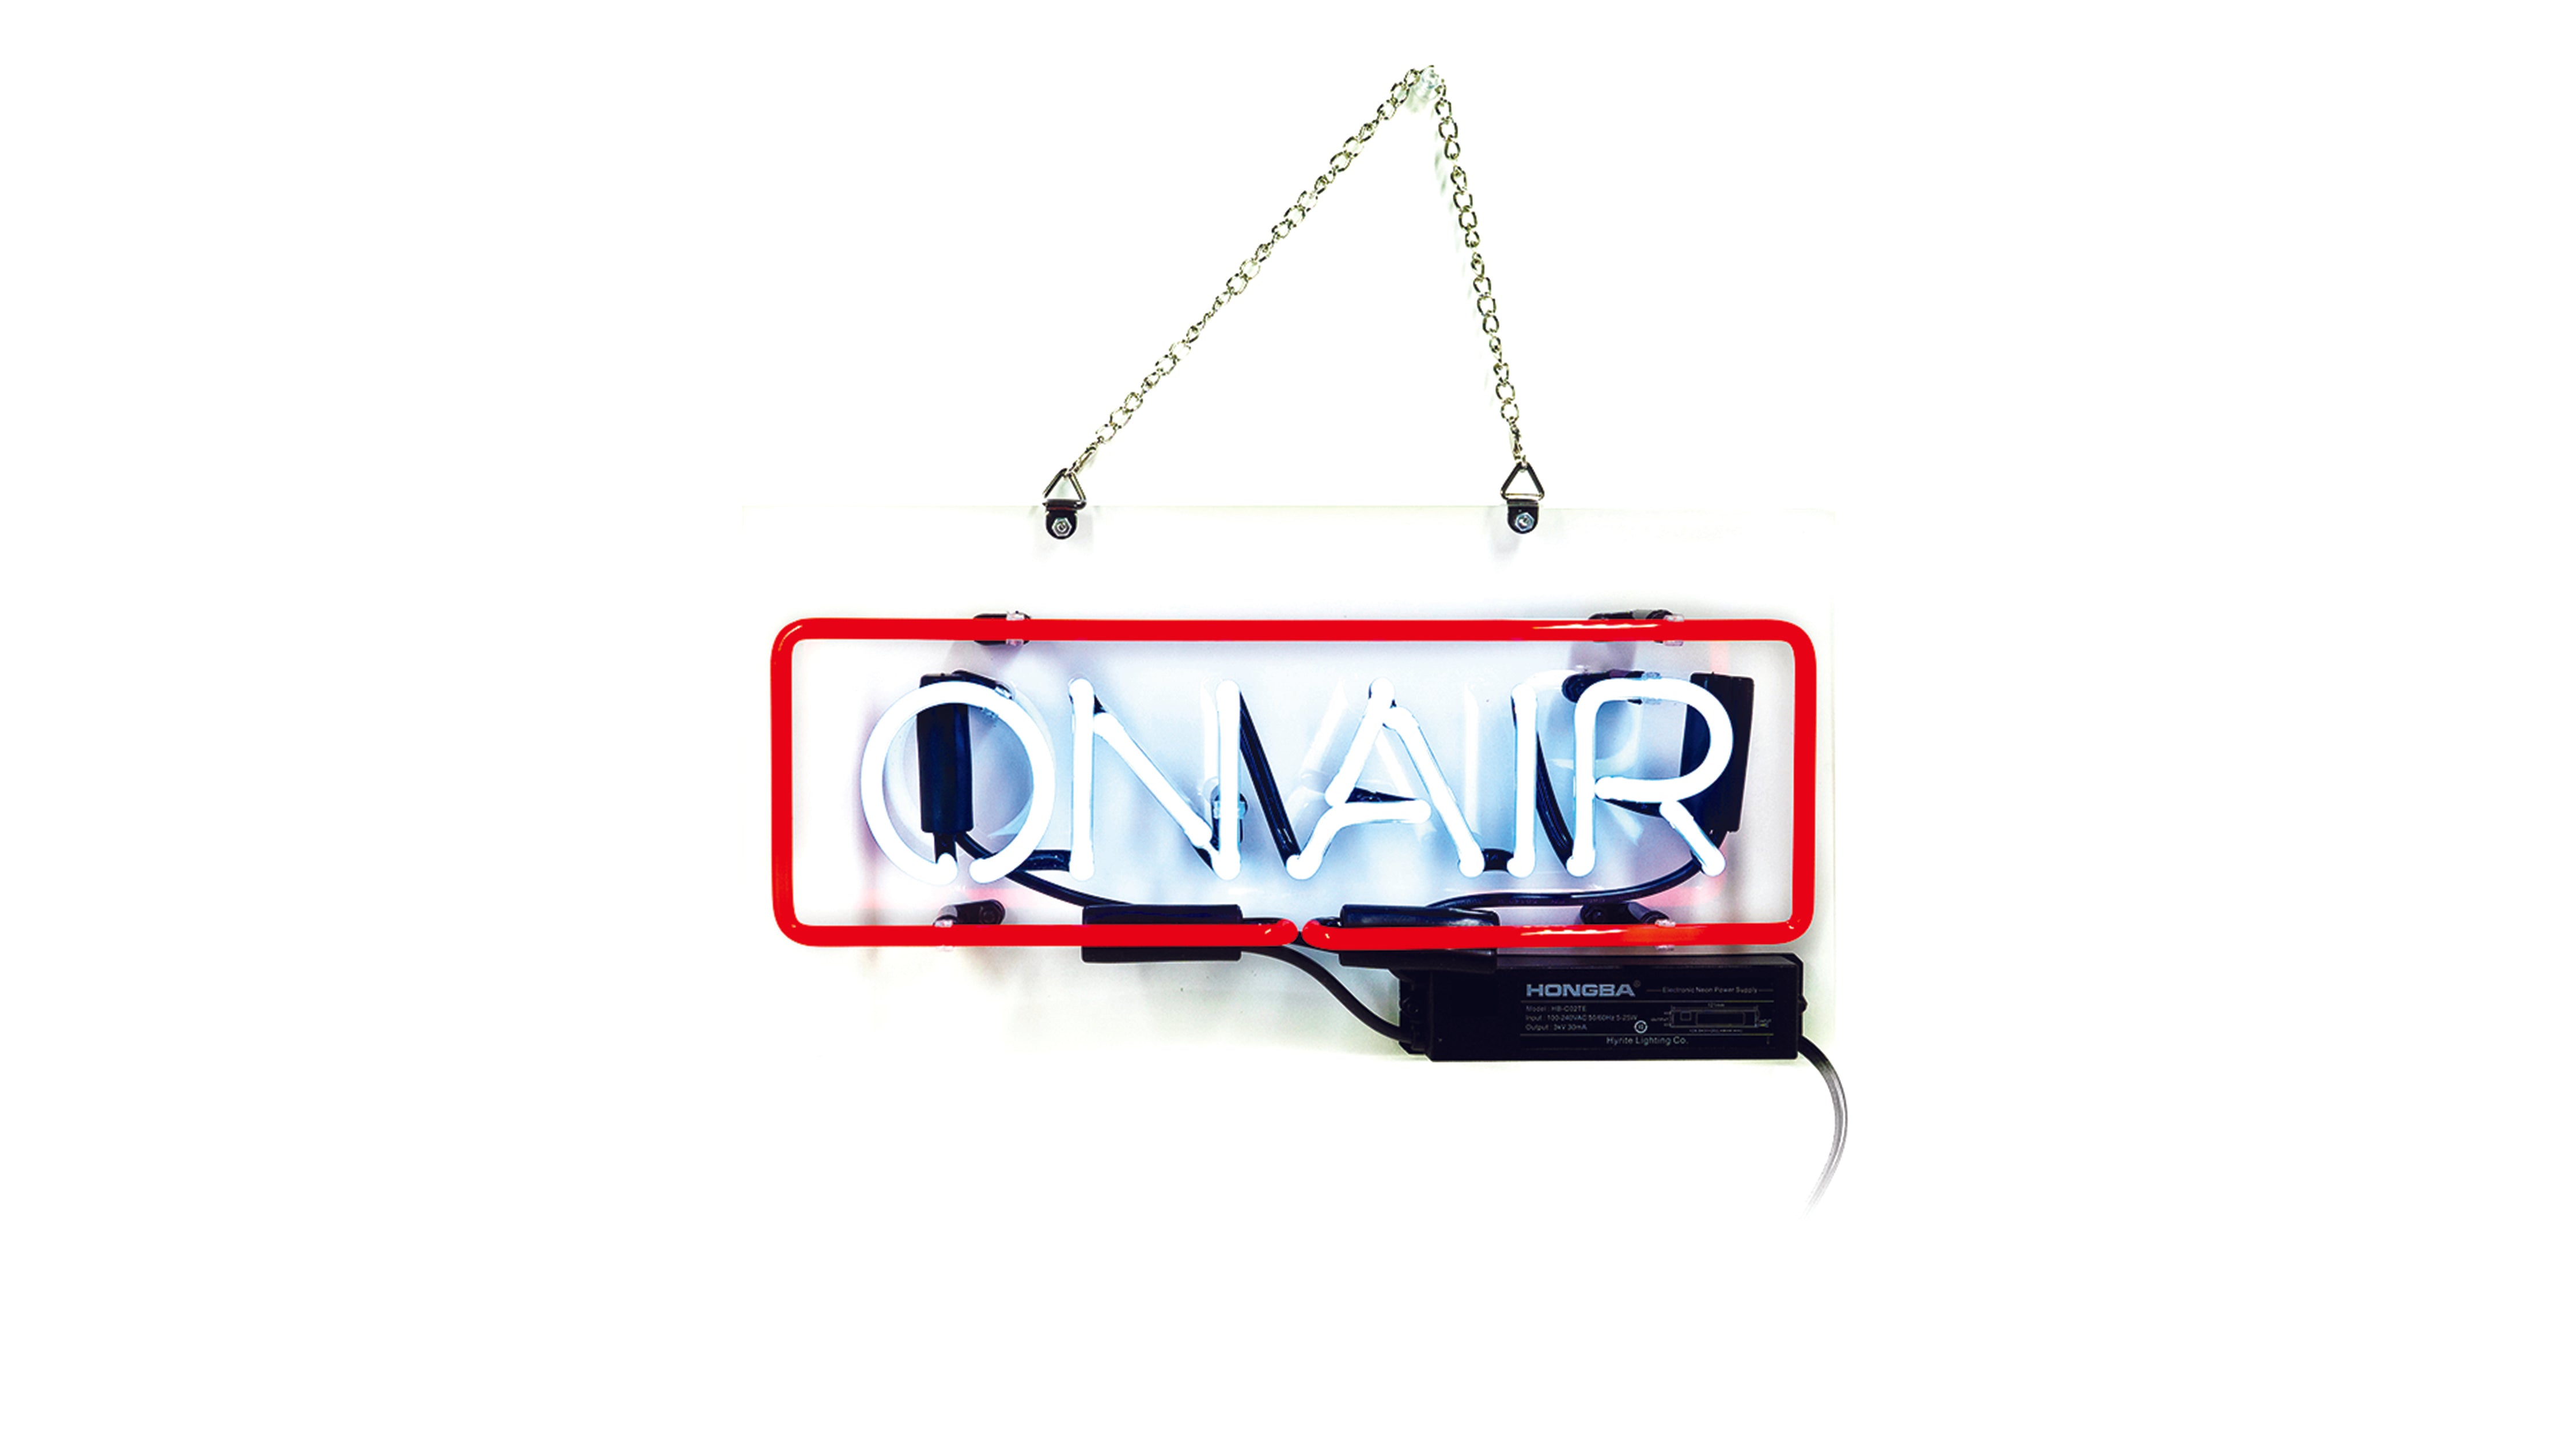 On Air Neon Sign